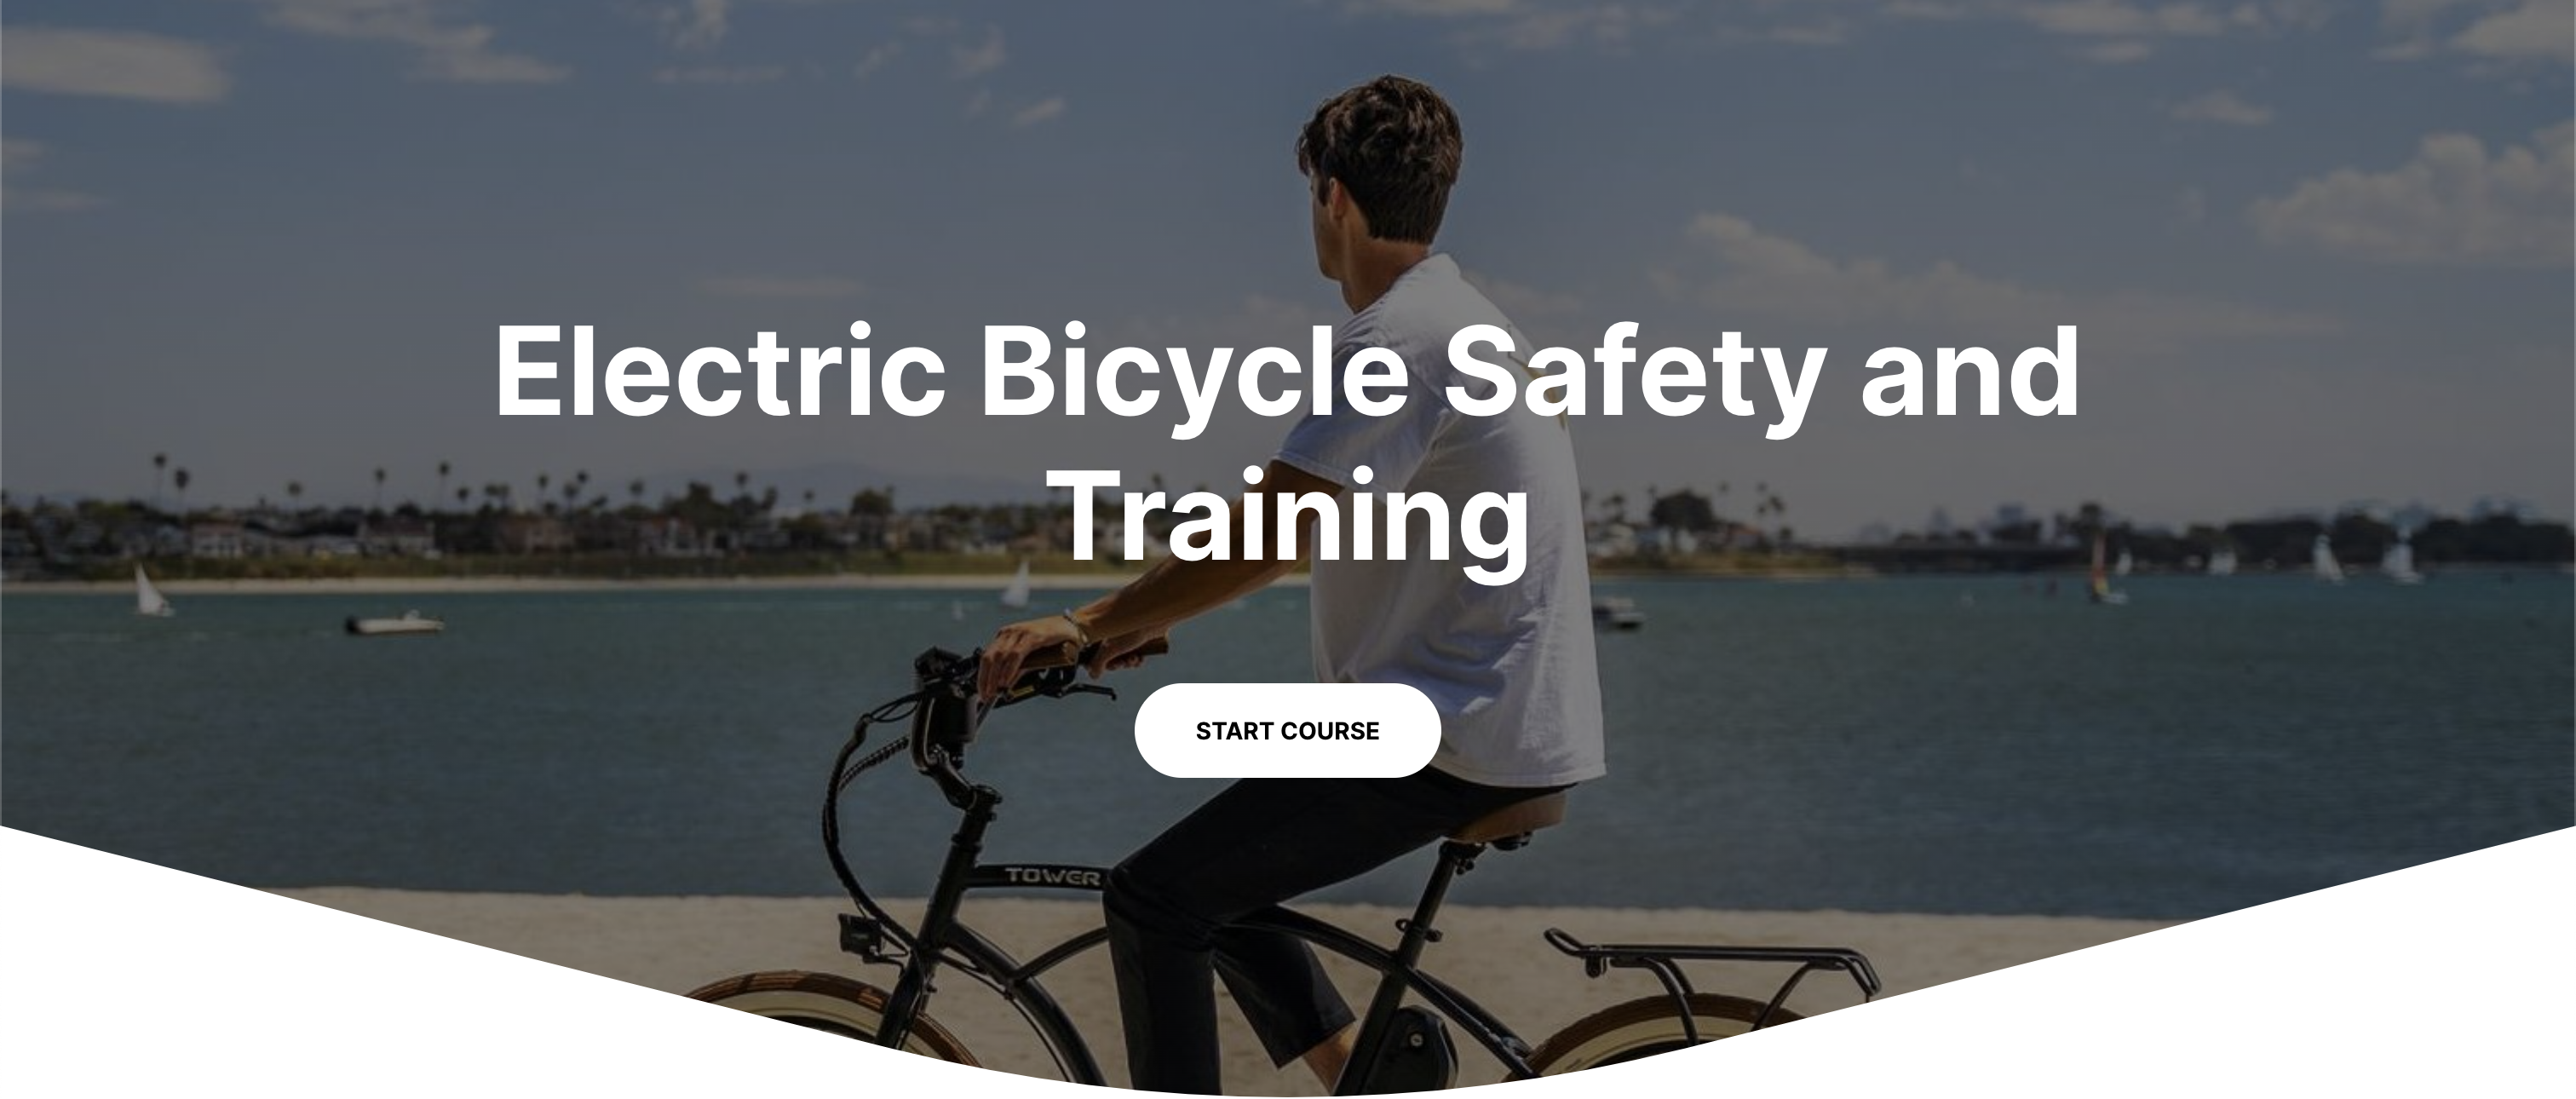 A man rides a bike on the beach, with text overlaid that reads "Electrical Bicycle Safety and Training."